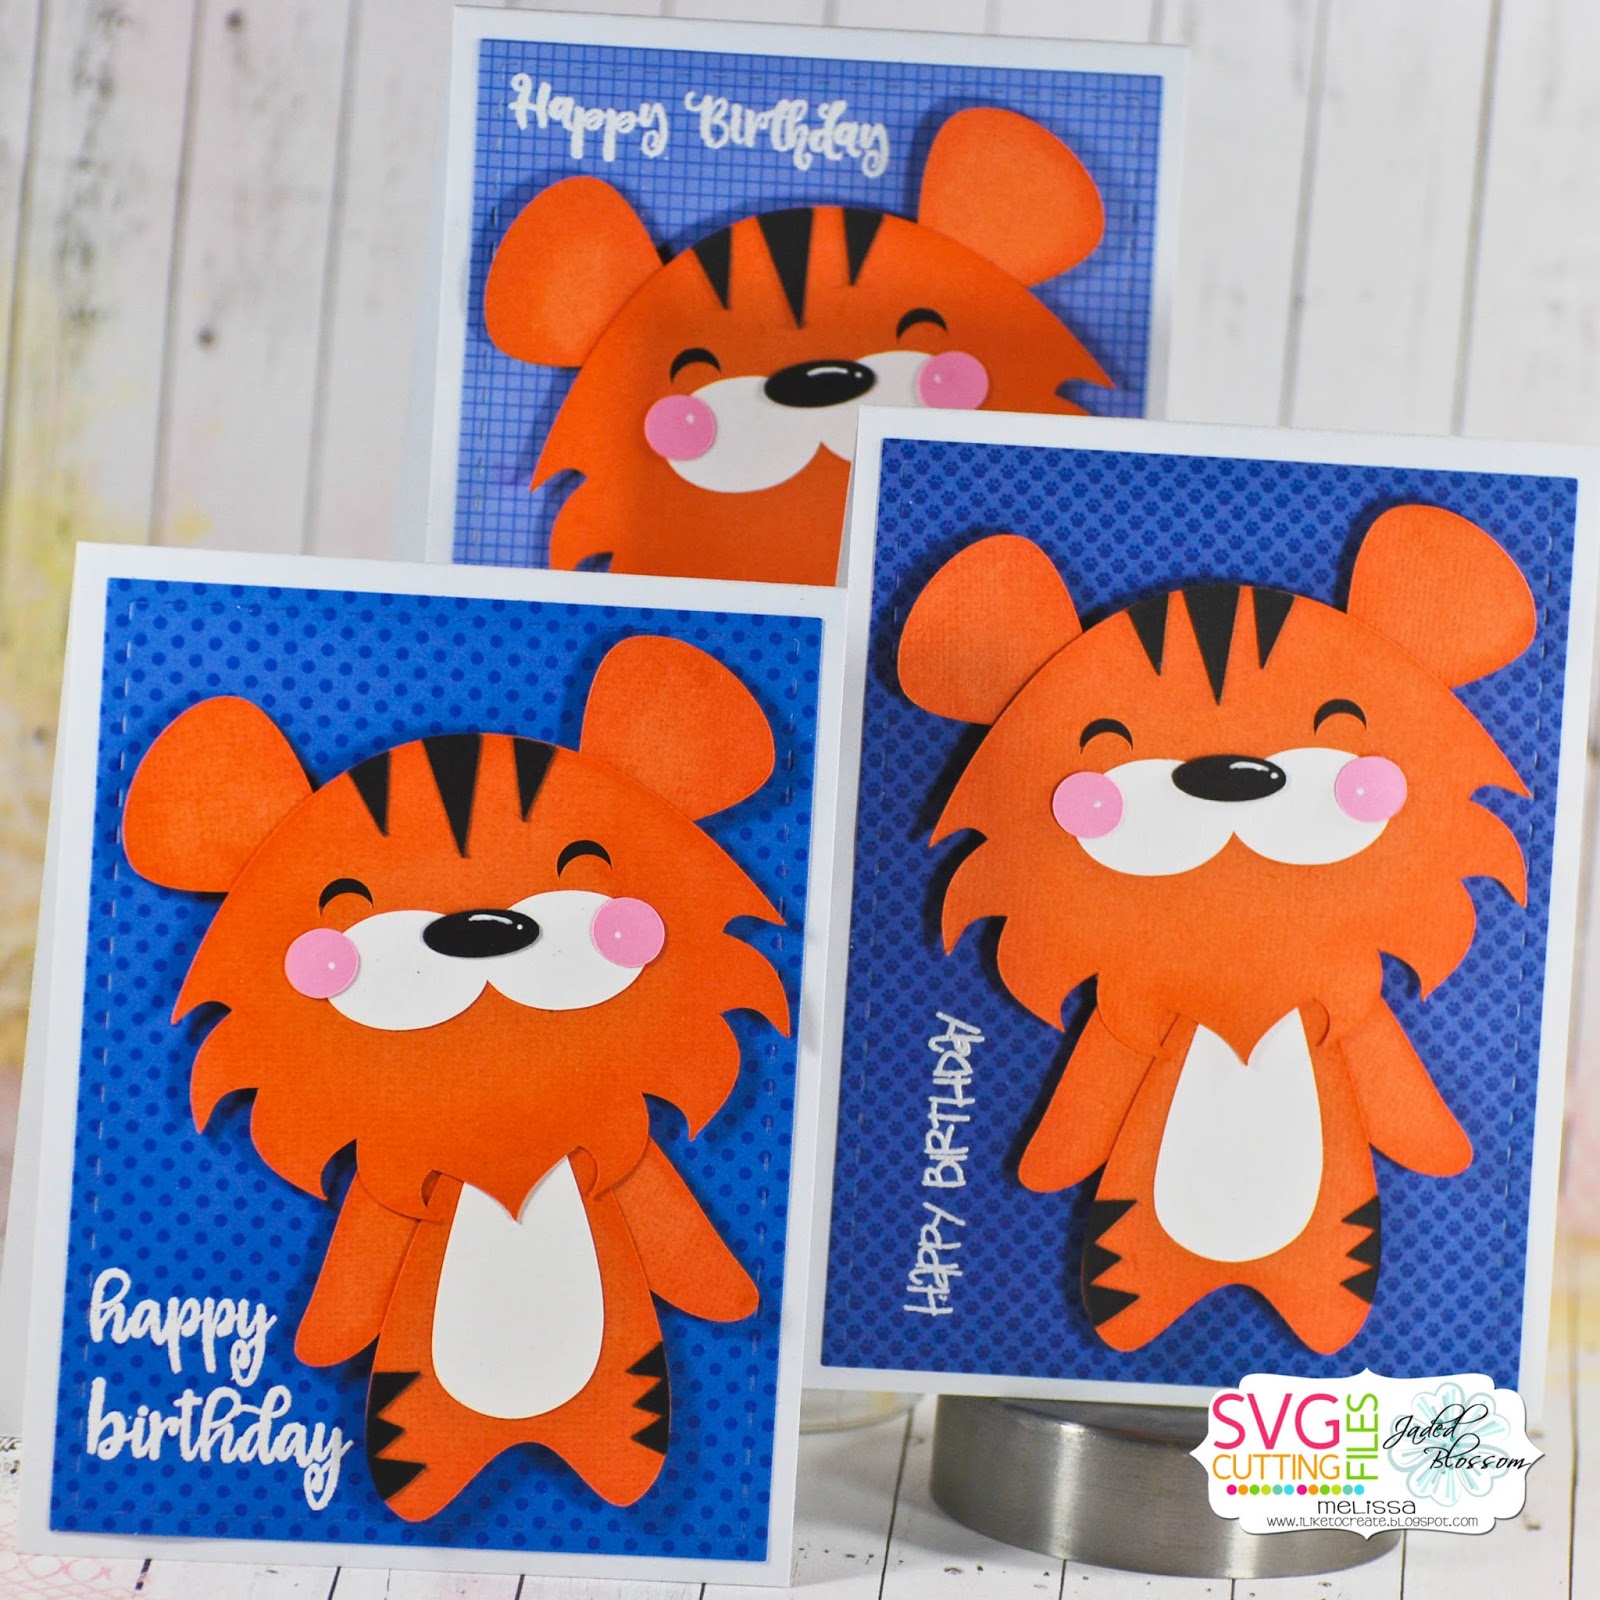 Download SVG Cutting Files: Chibi Tiger Happy Birthday Cards!